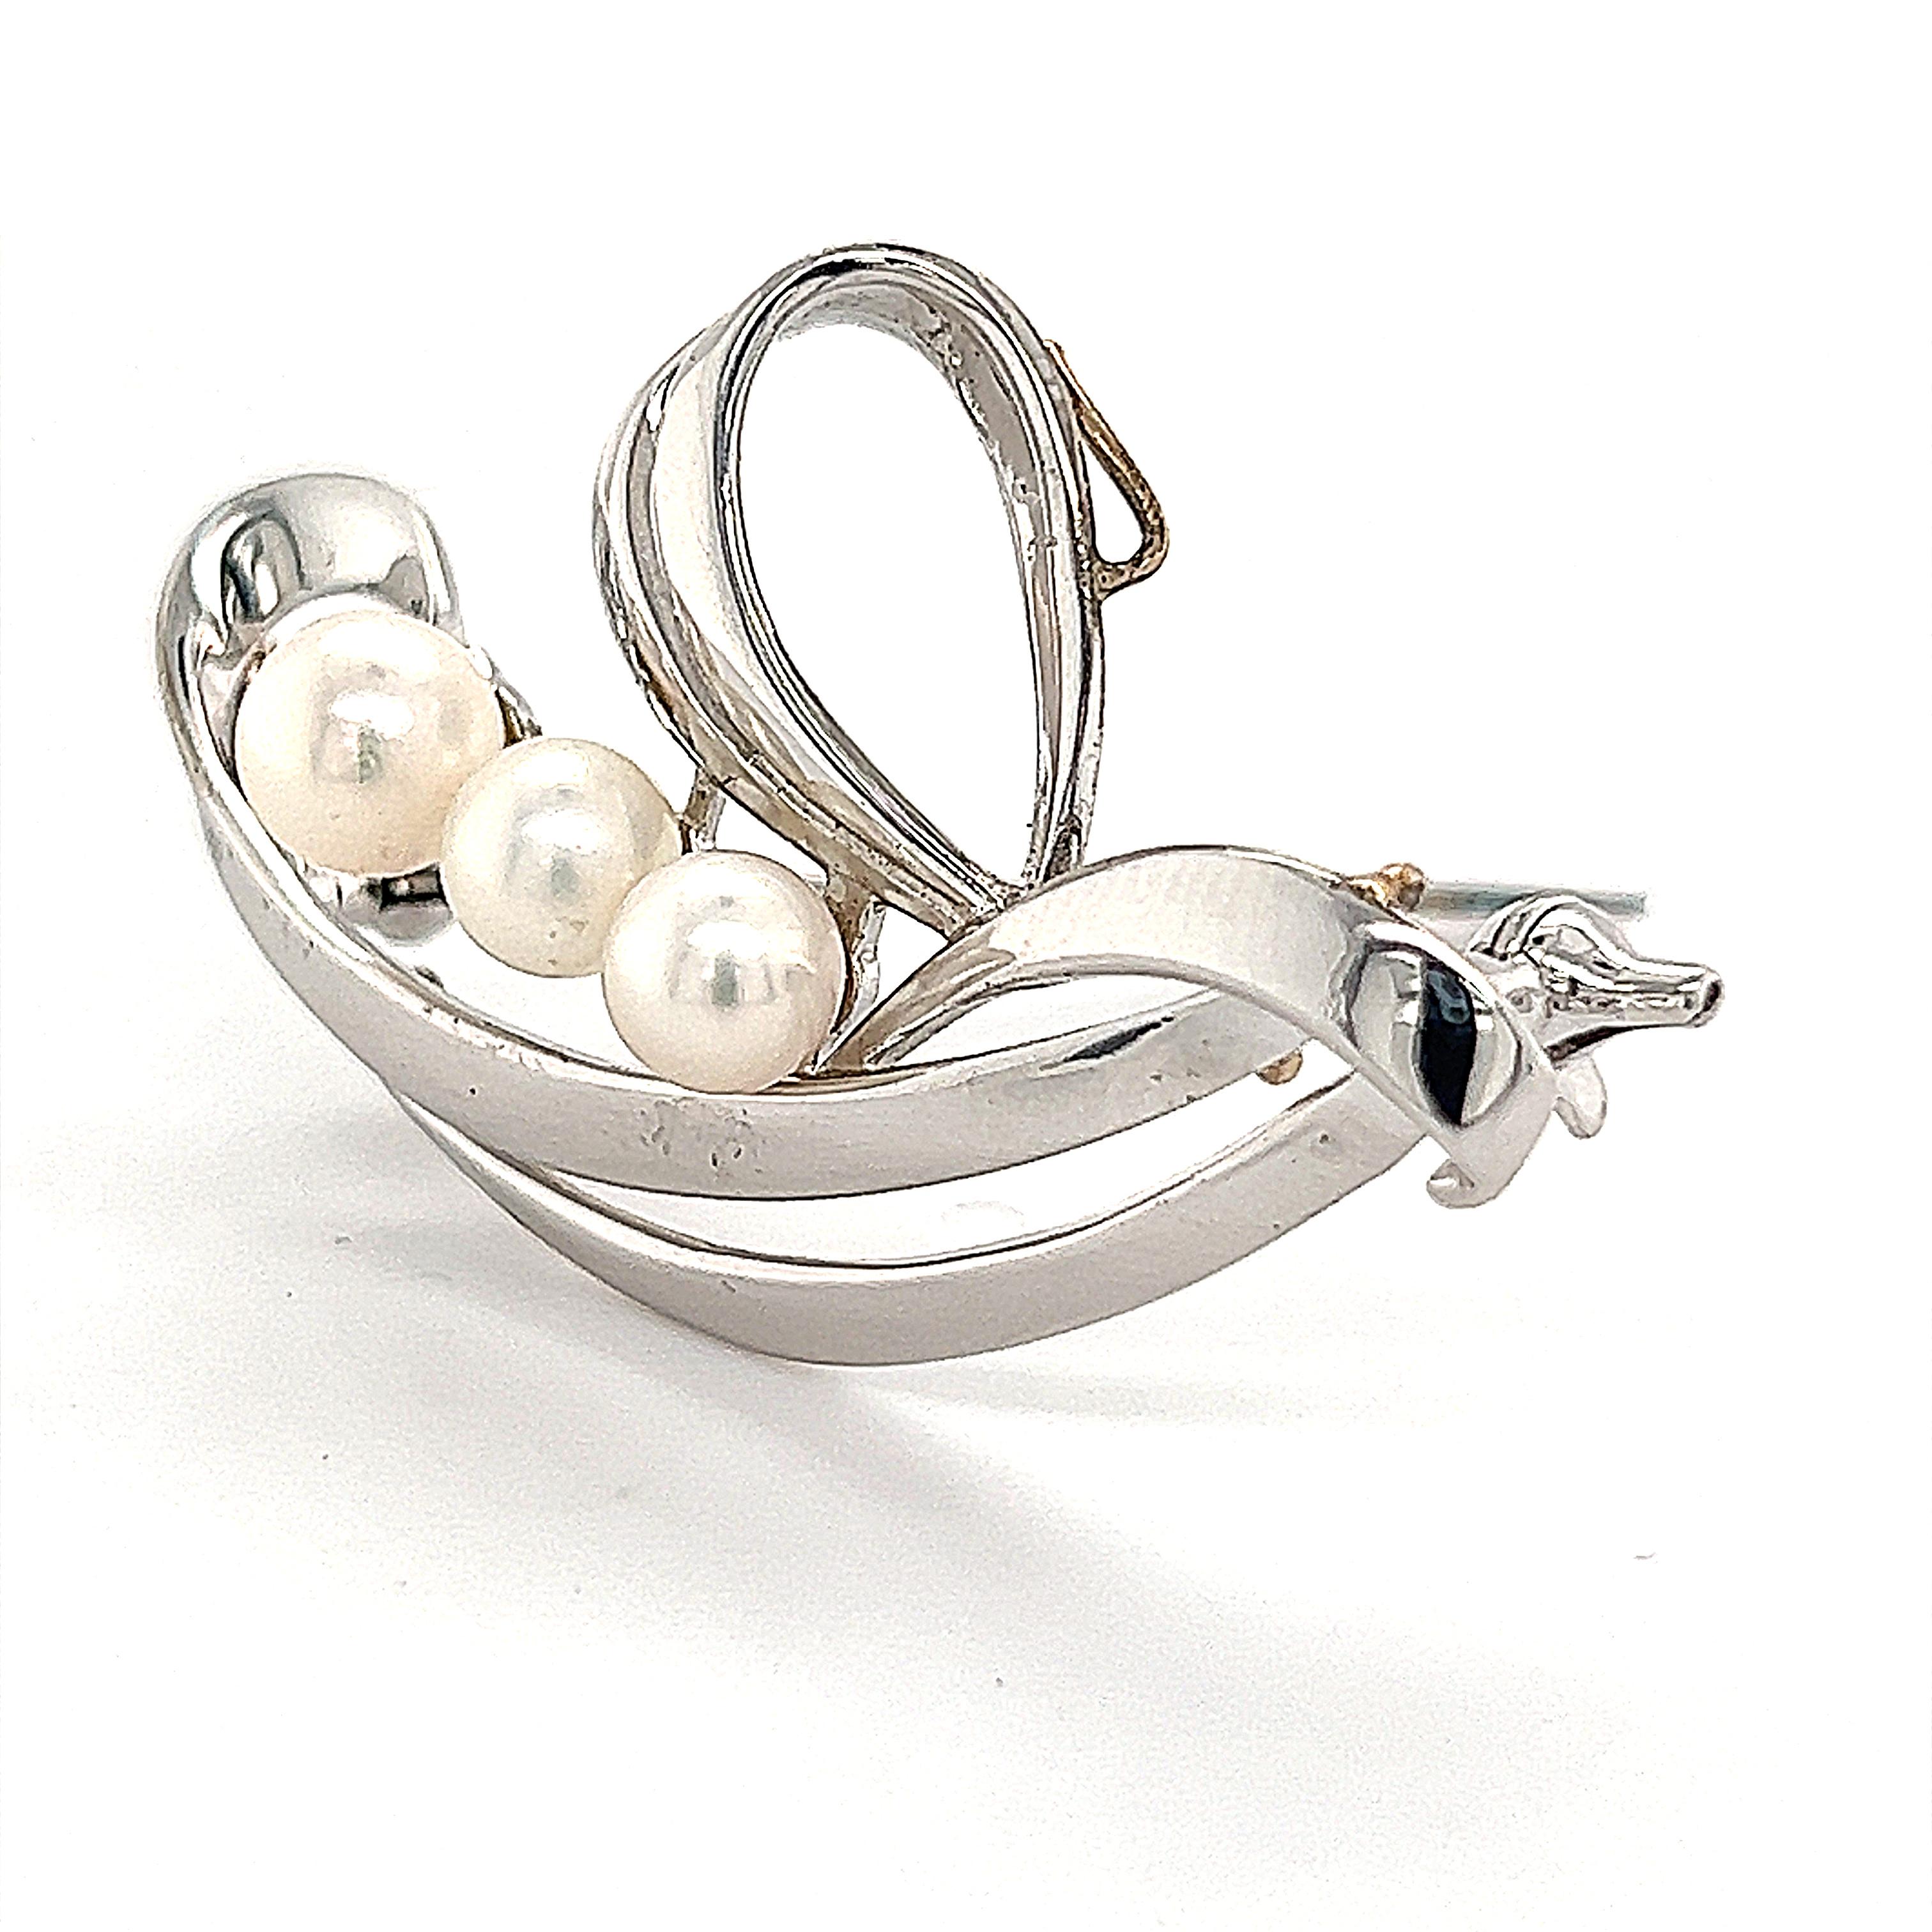 Mikimoto Estate Akoya Pearl Brooch Sterling Silver 6.5 mm 5 Grams For Sale 3